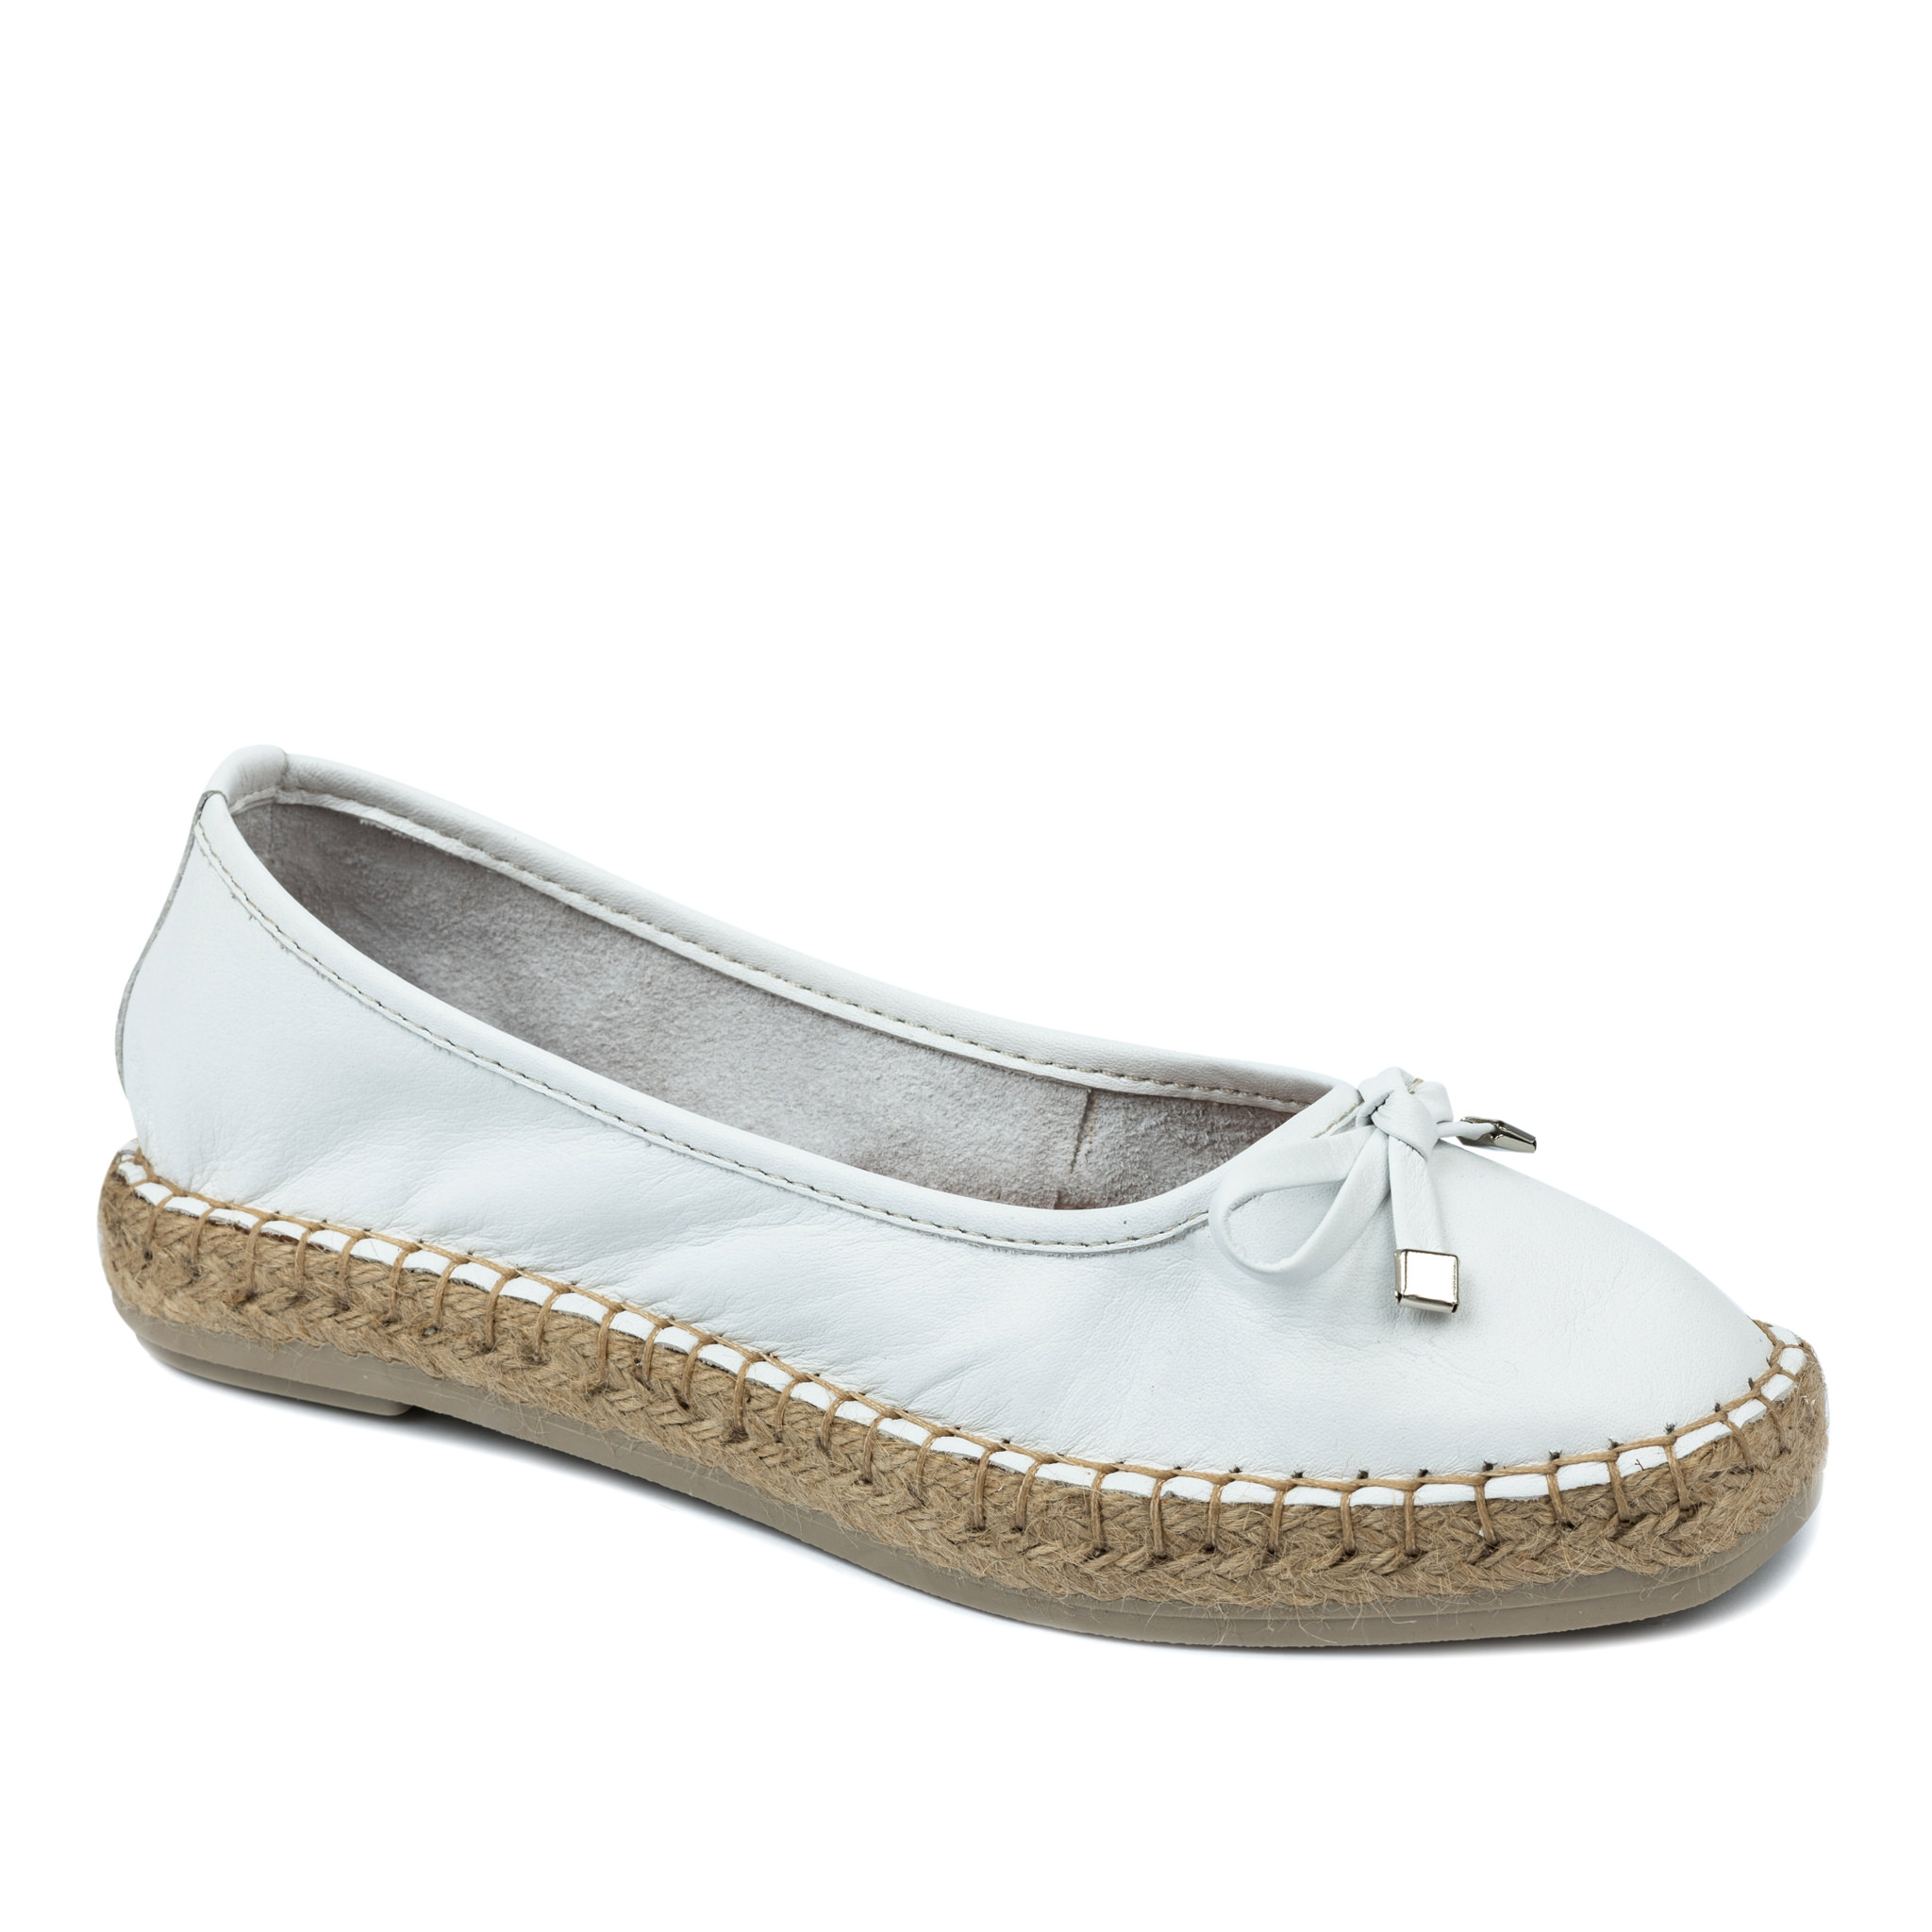 Leather espadrilles A577 - WHITE